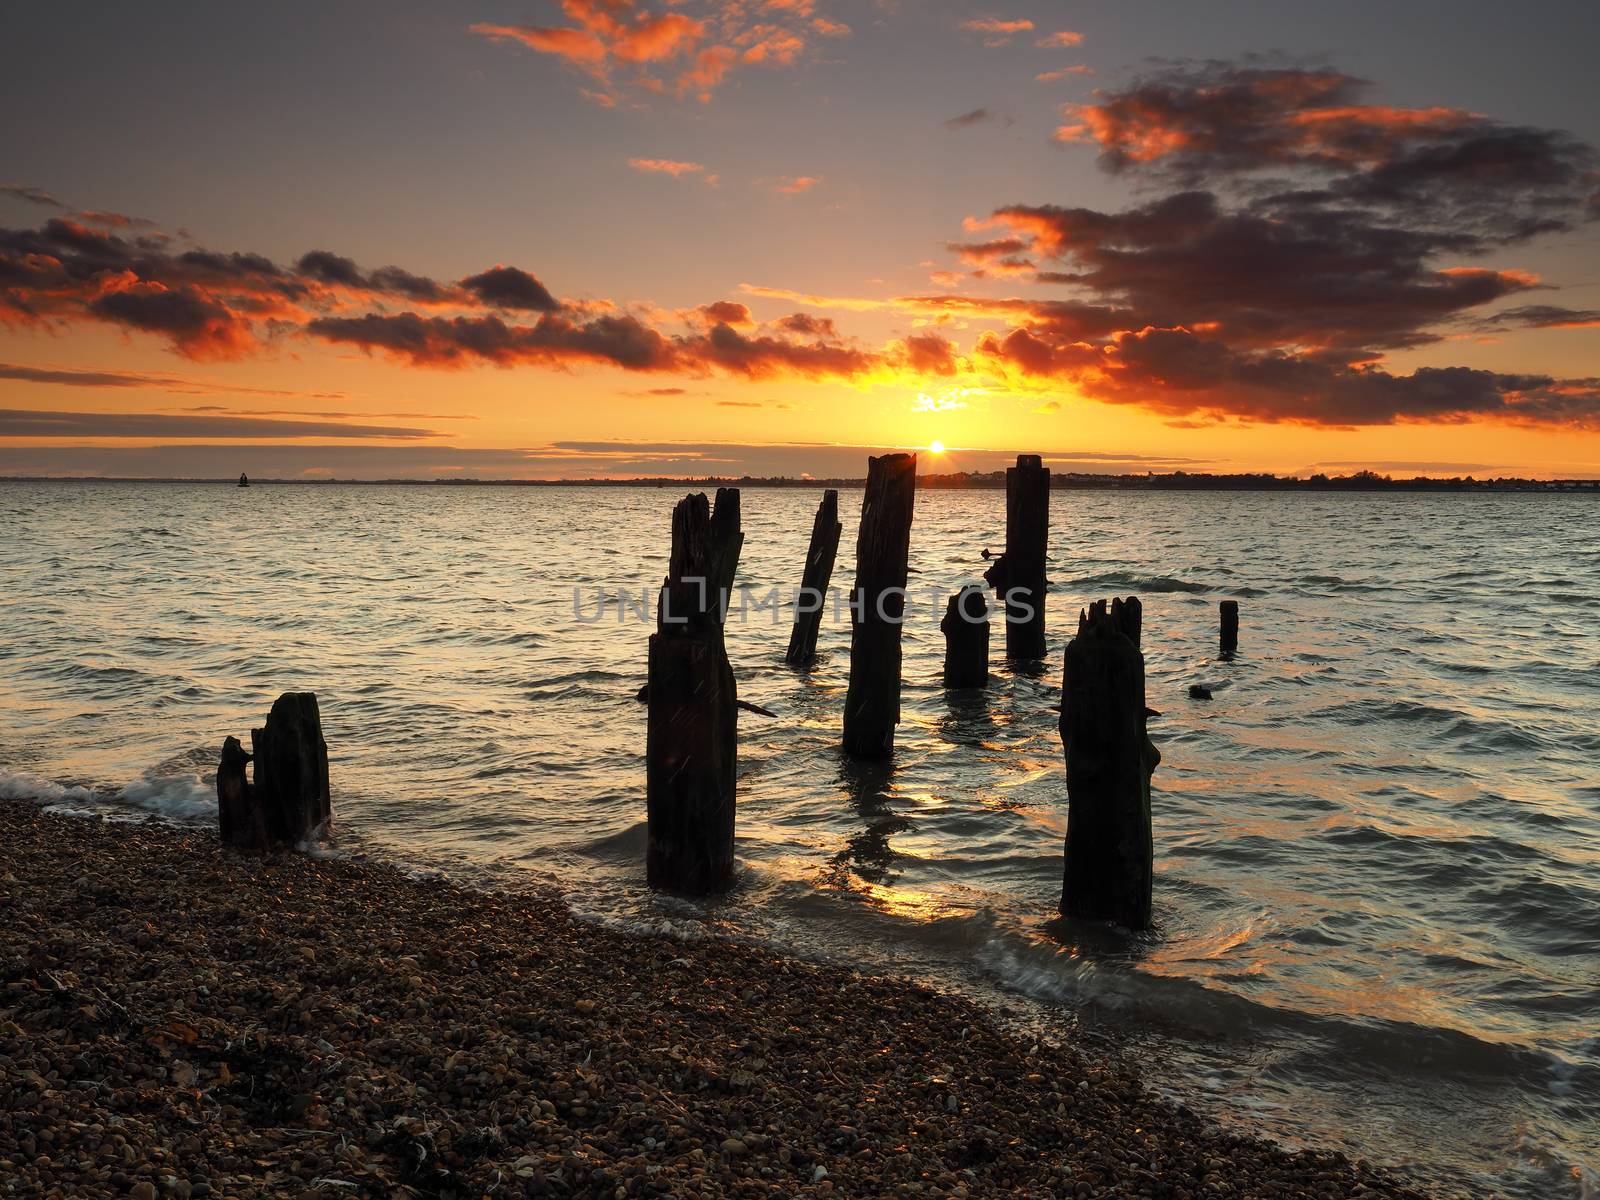 Remains of the old wooden jetty looking out over the sea to Harwich with a stunning sunset of clouds lit up in orange, Felixstowe, Suffolk, UK